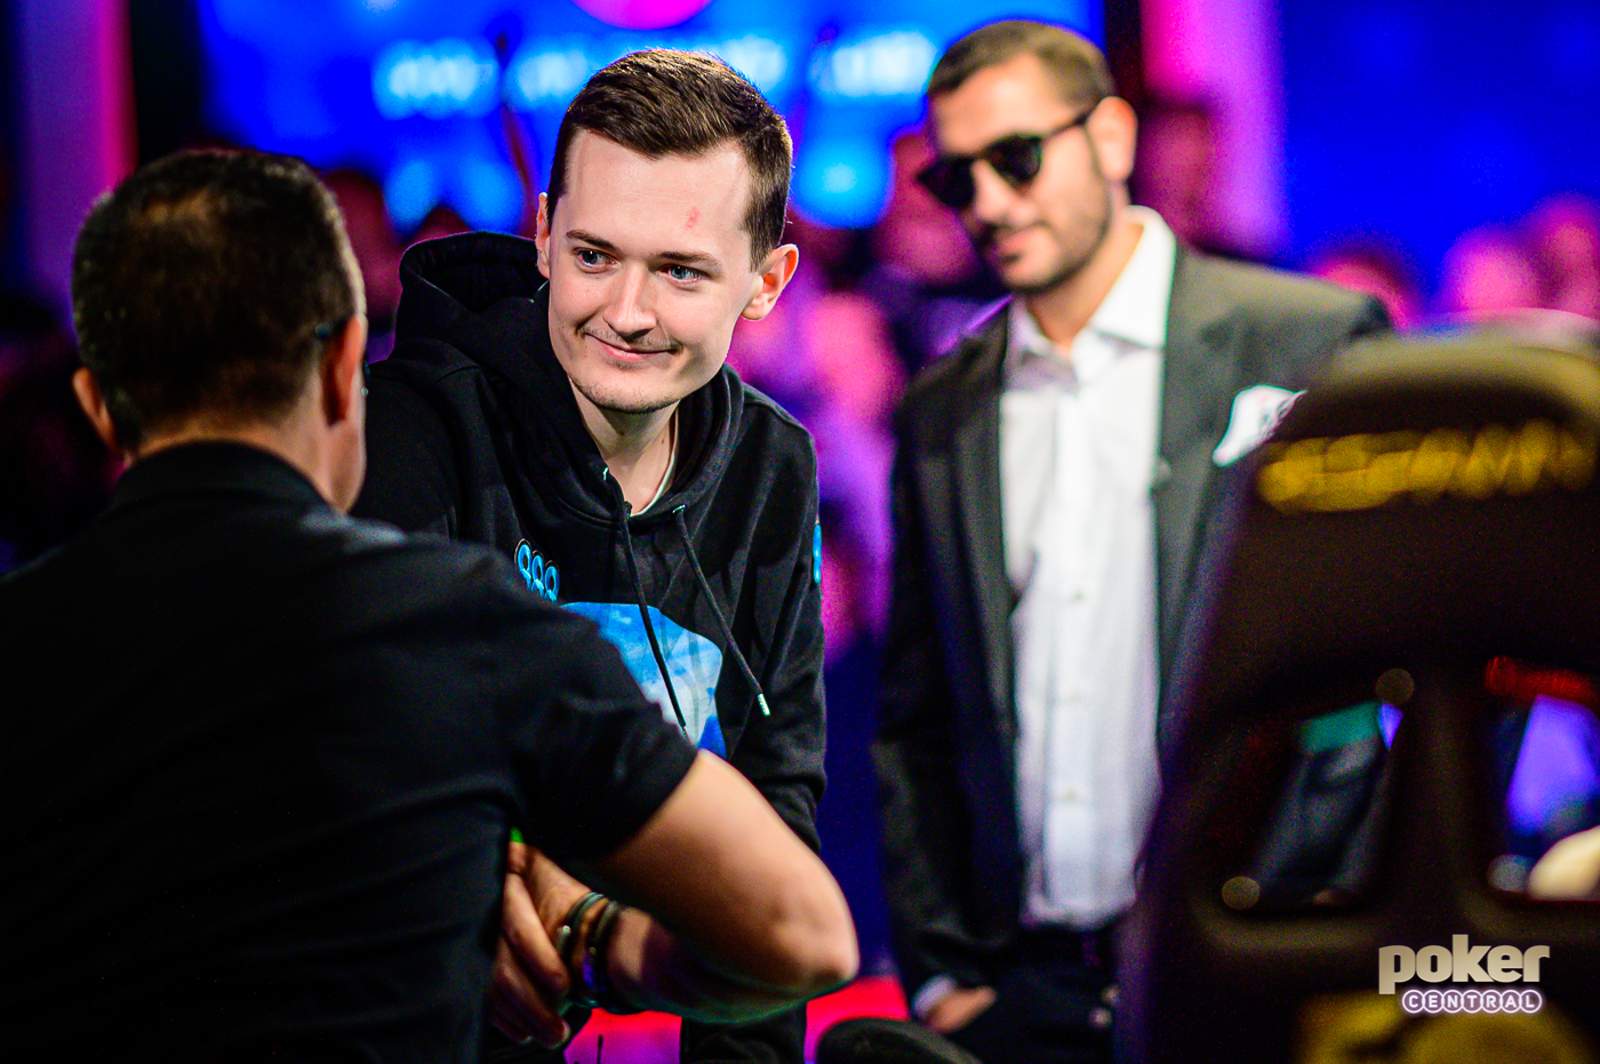 21-Year Old Nick Marchington Humble in Defeat After 7th Place Finish in WSOP Main Event